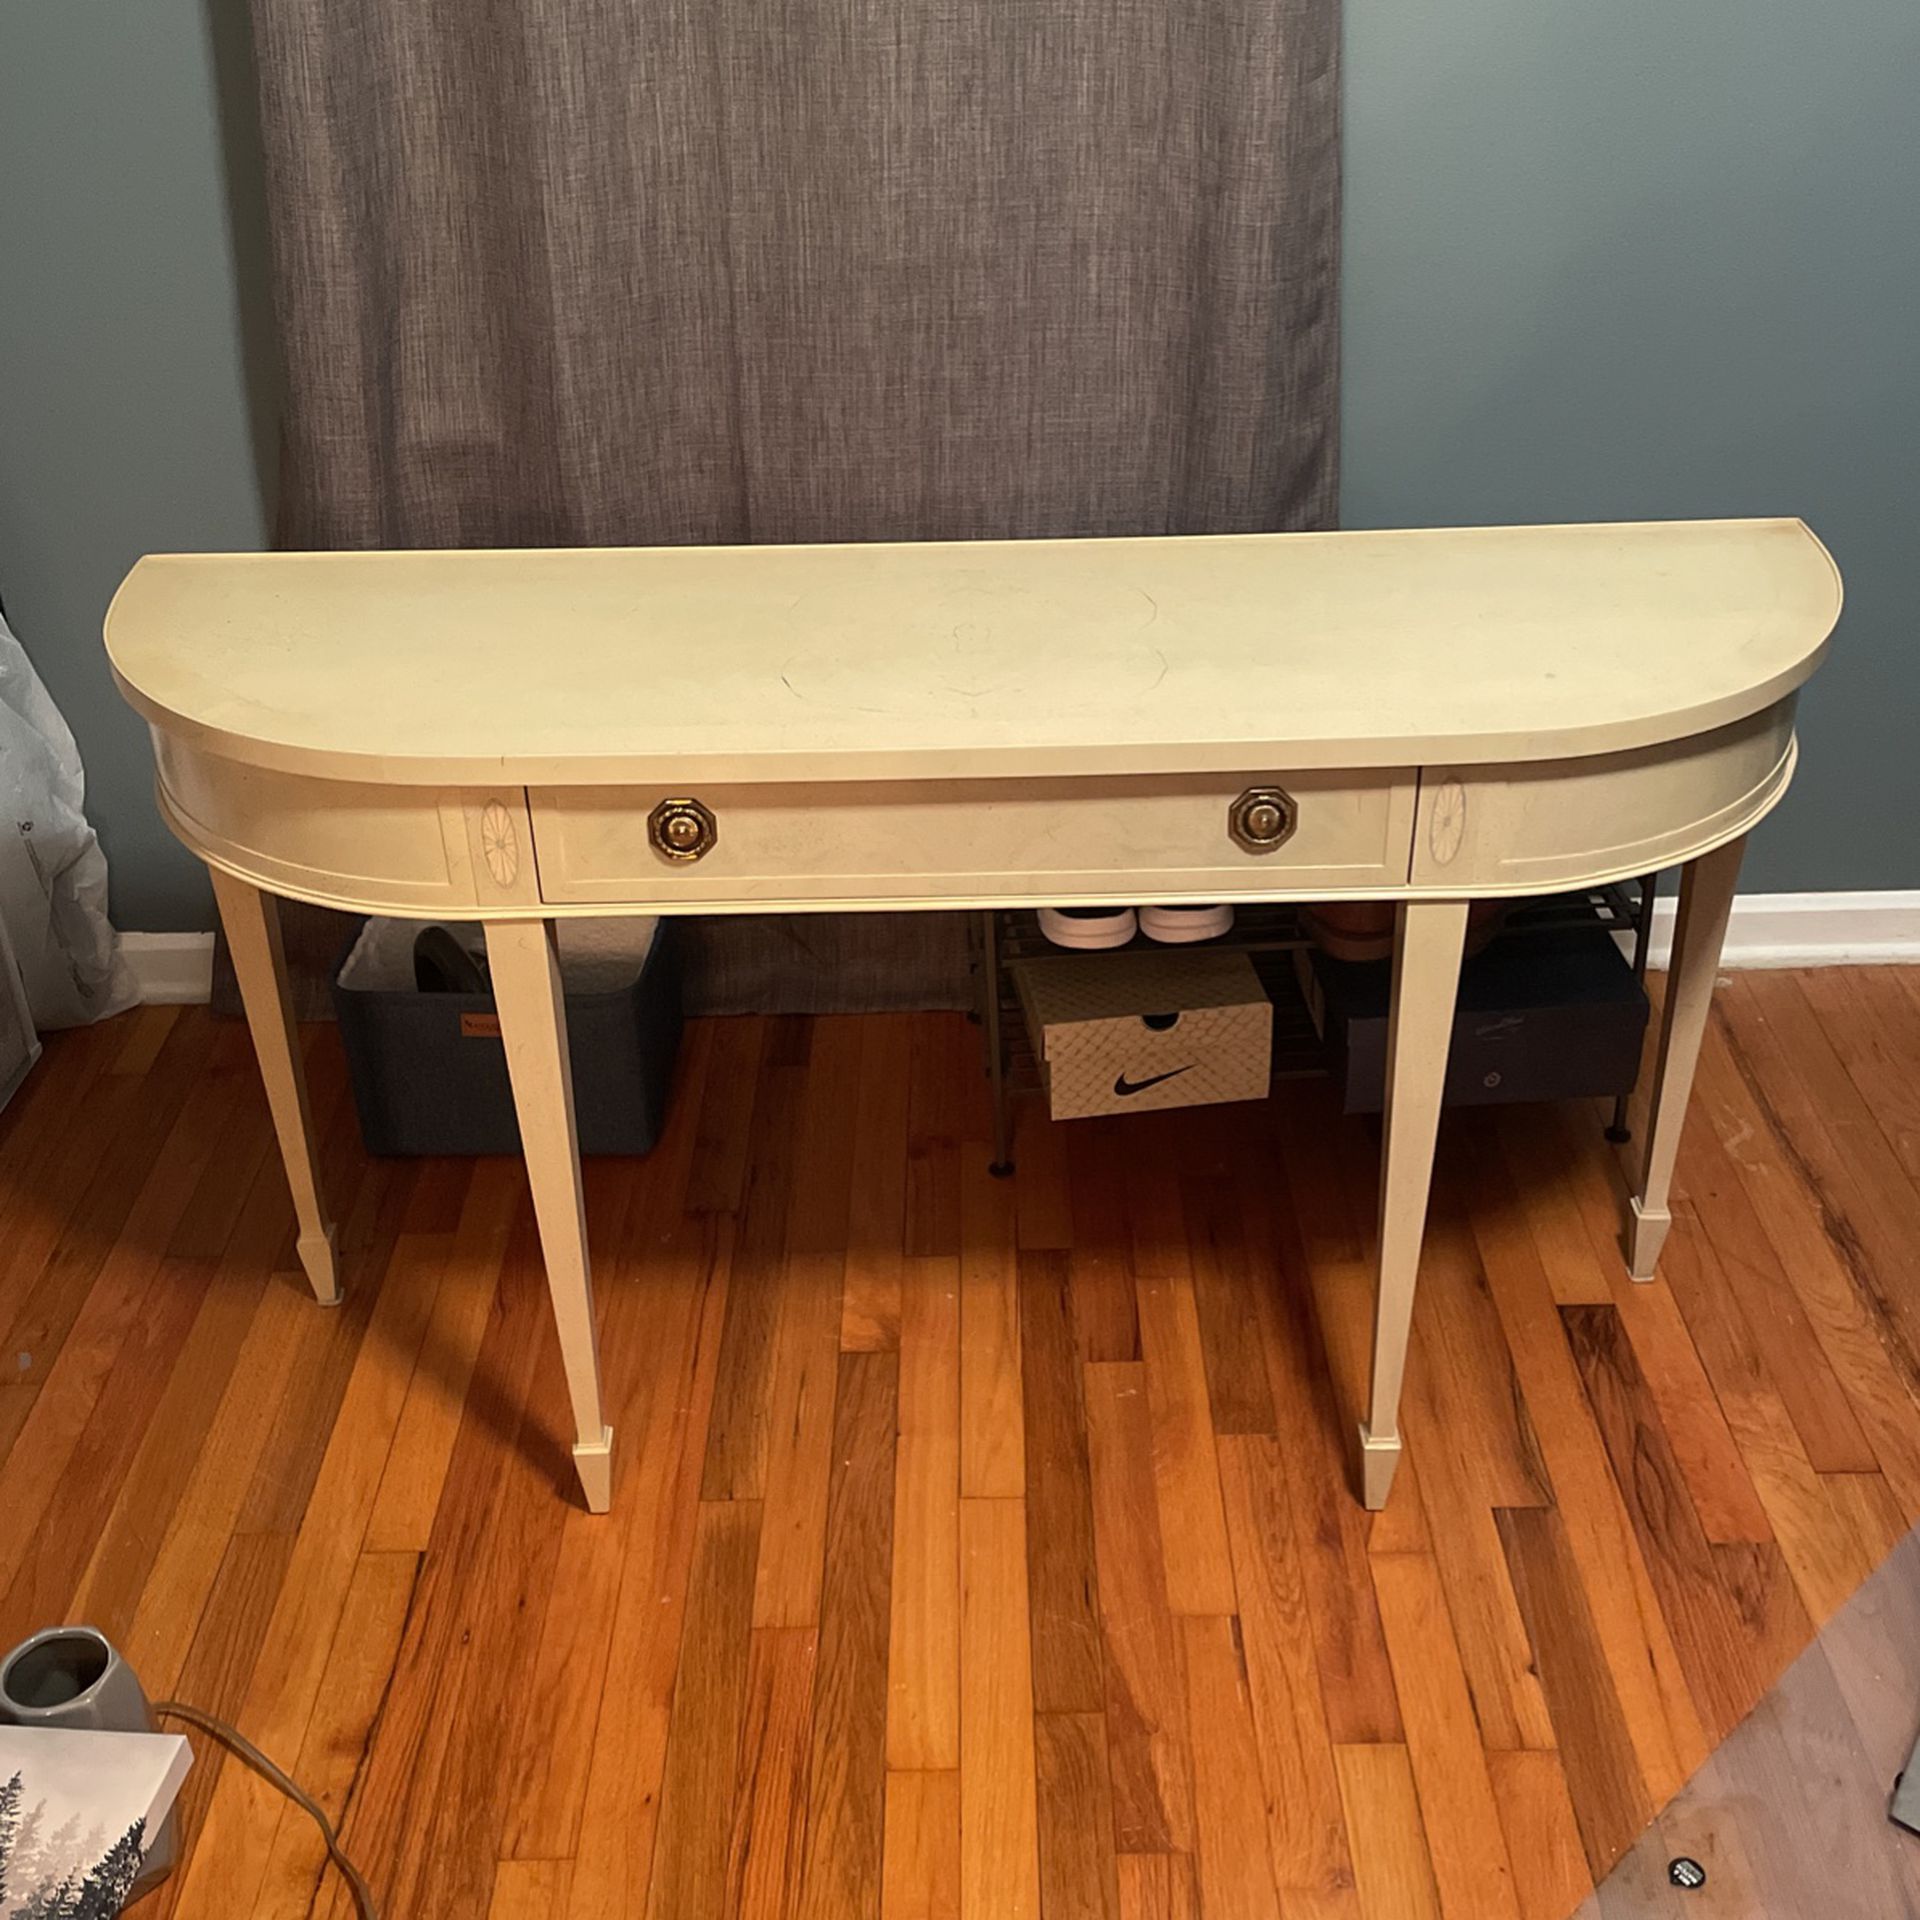 Hallway/console table